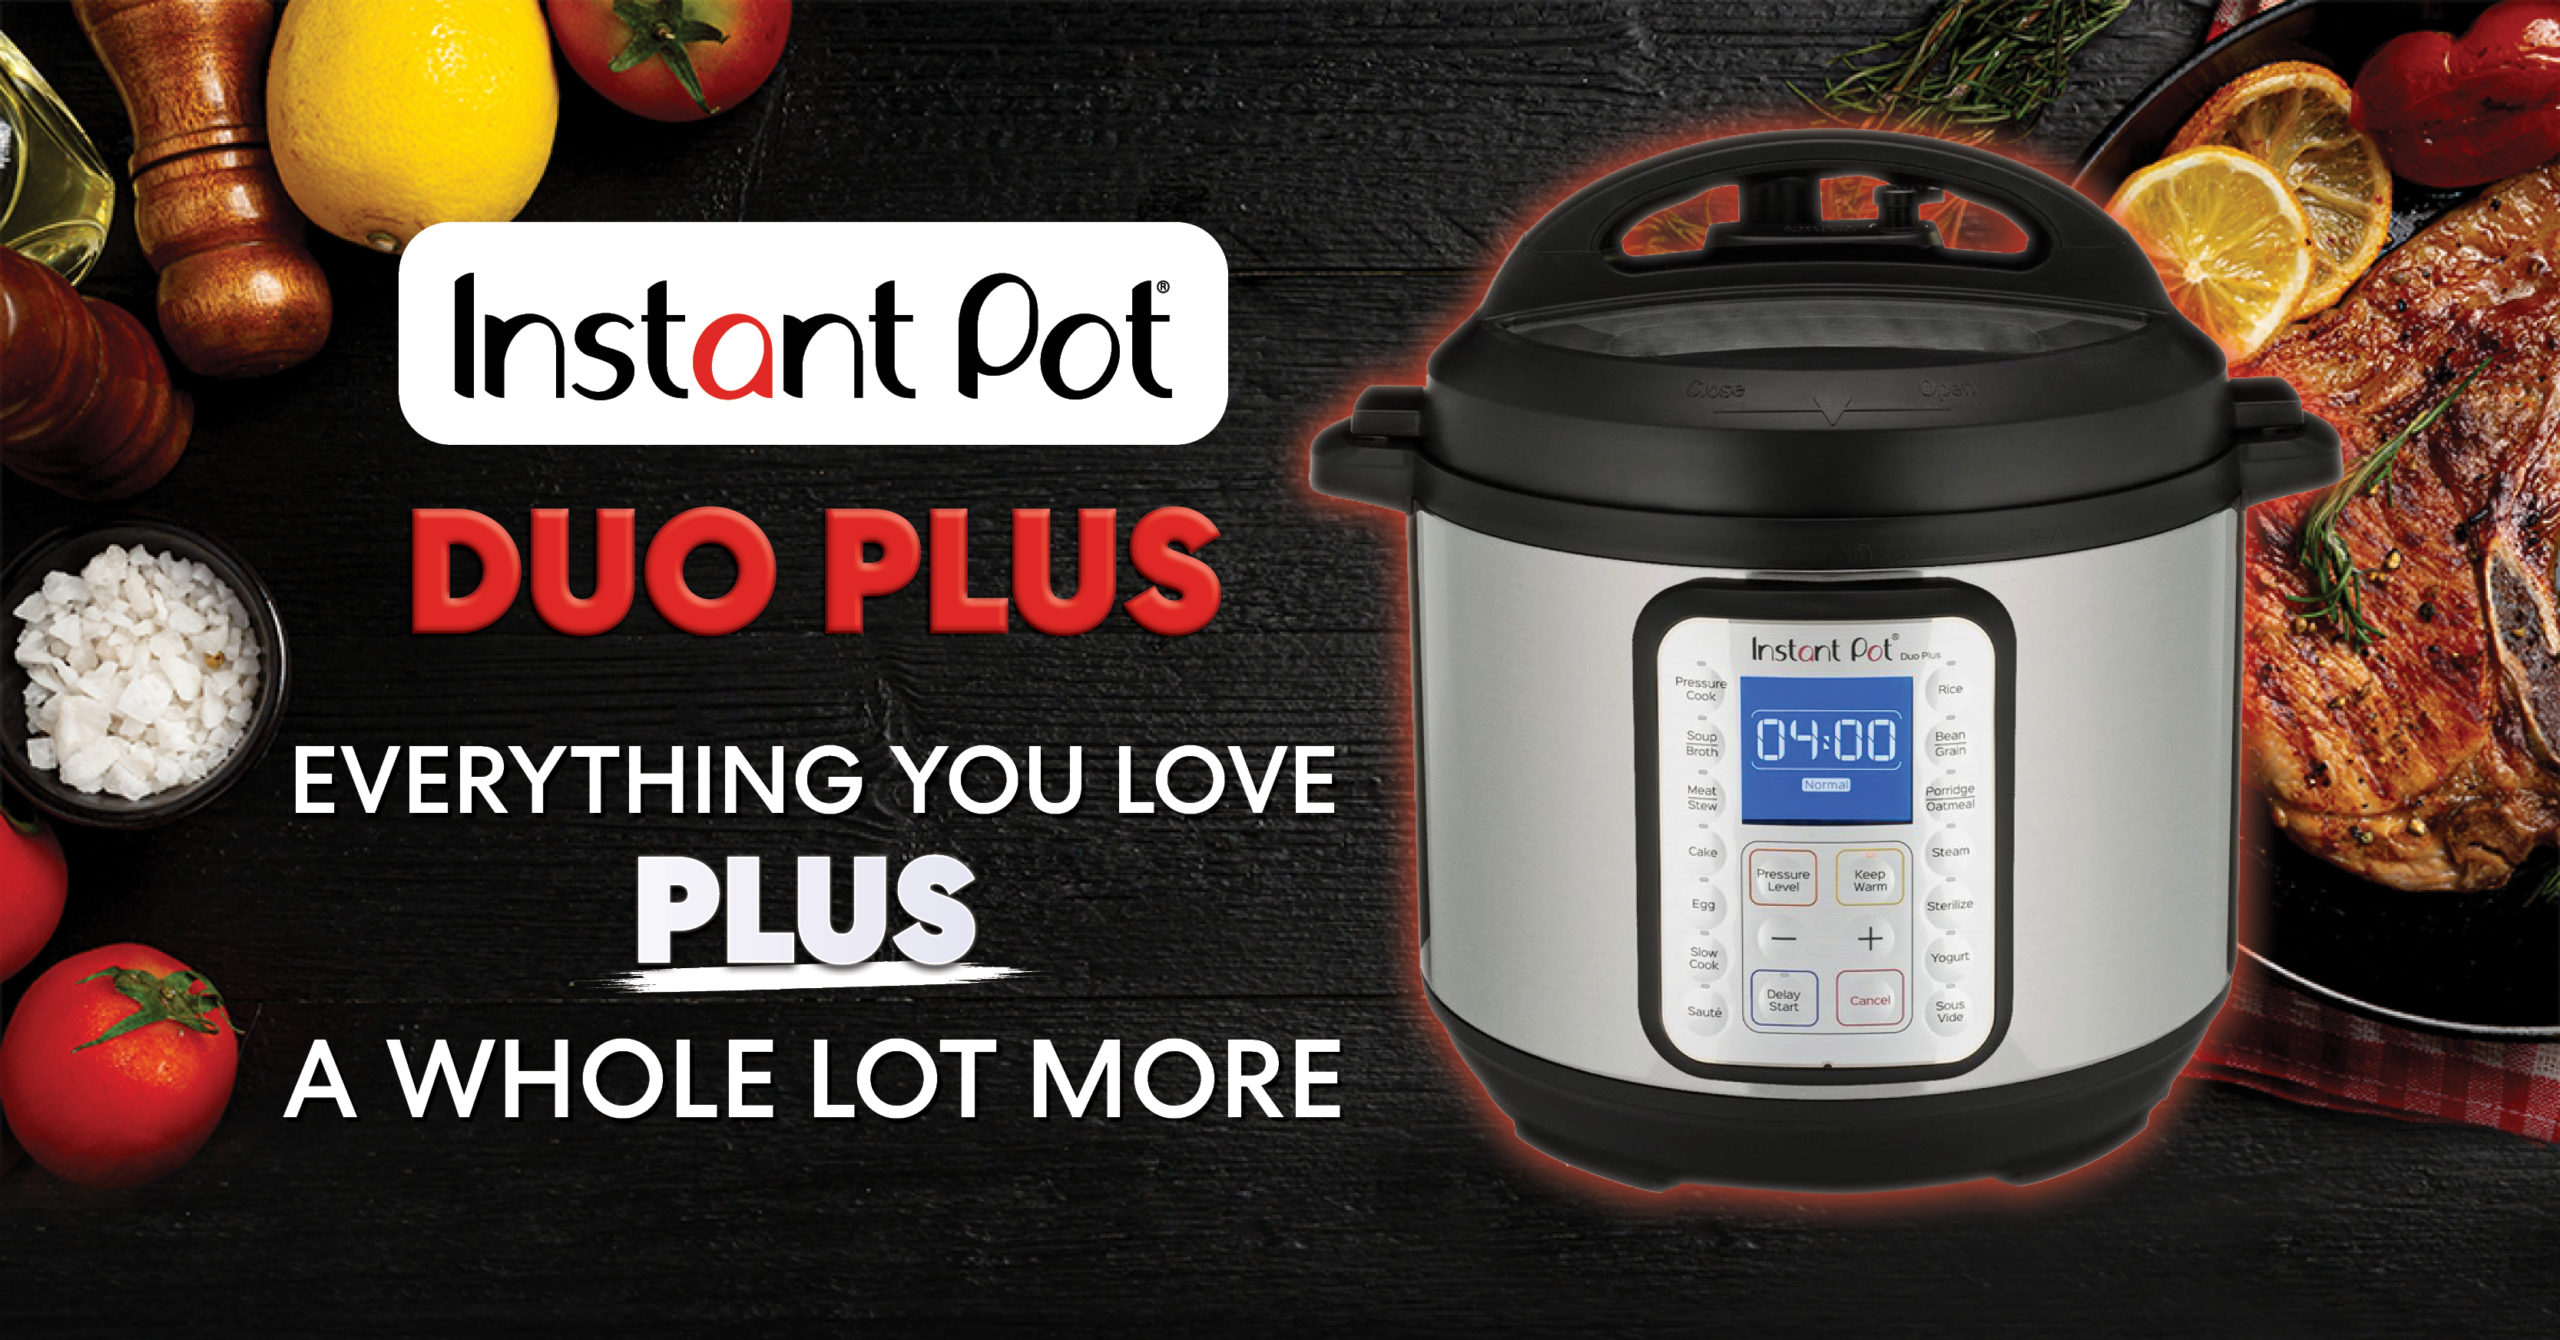 This is your last chance to get these Instant Pots -- and Instant